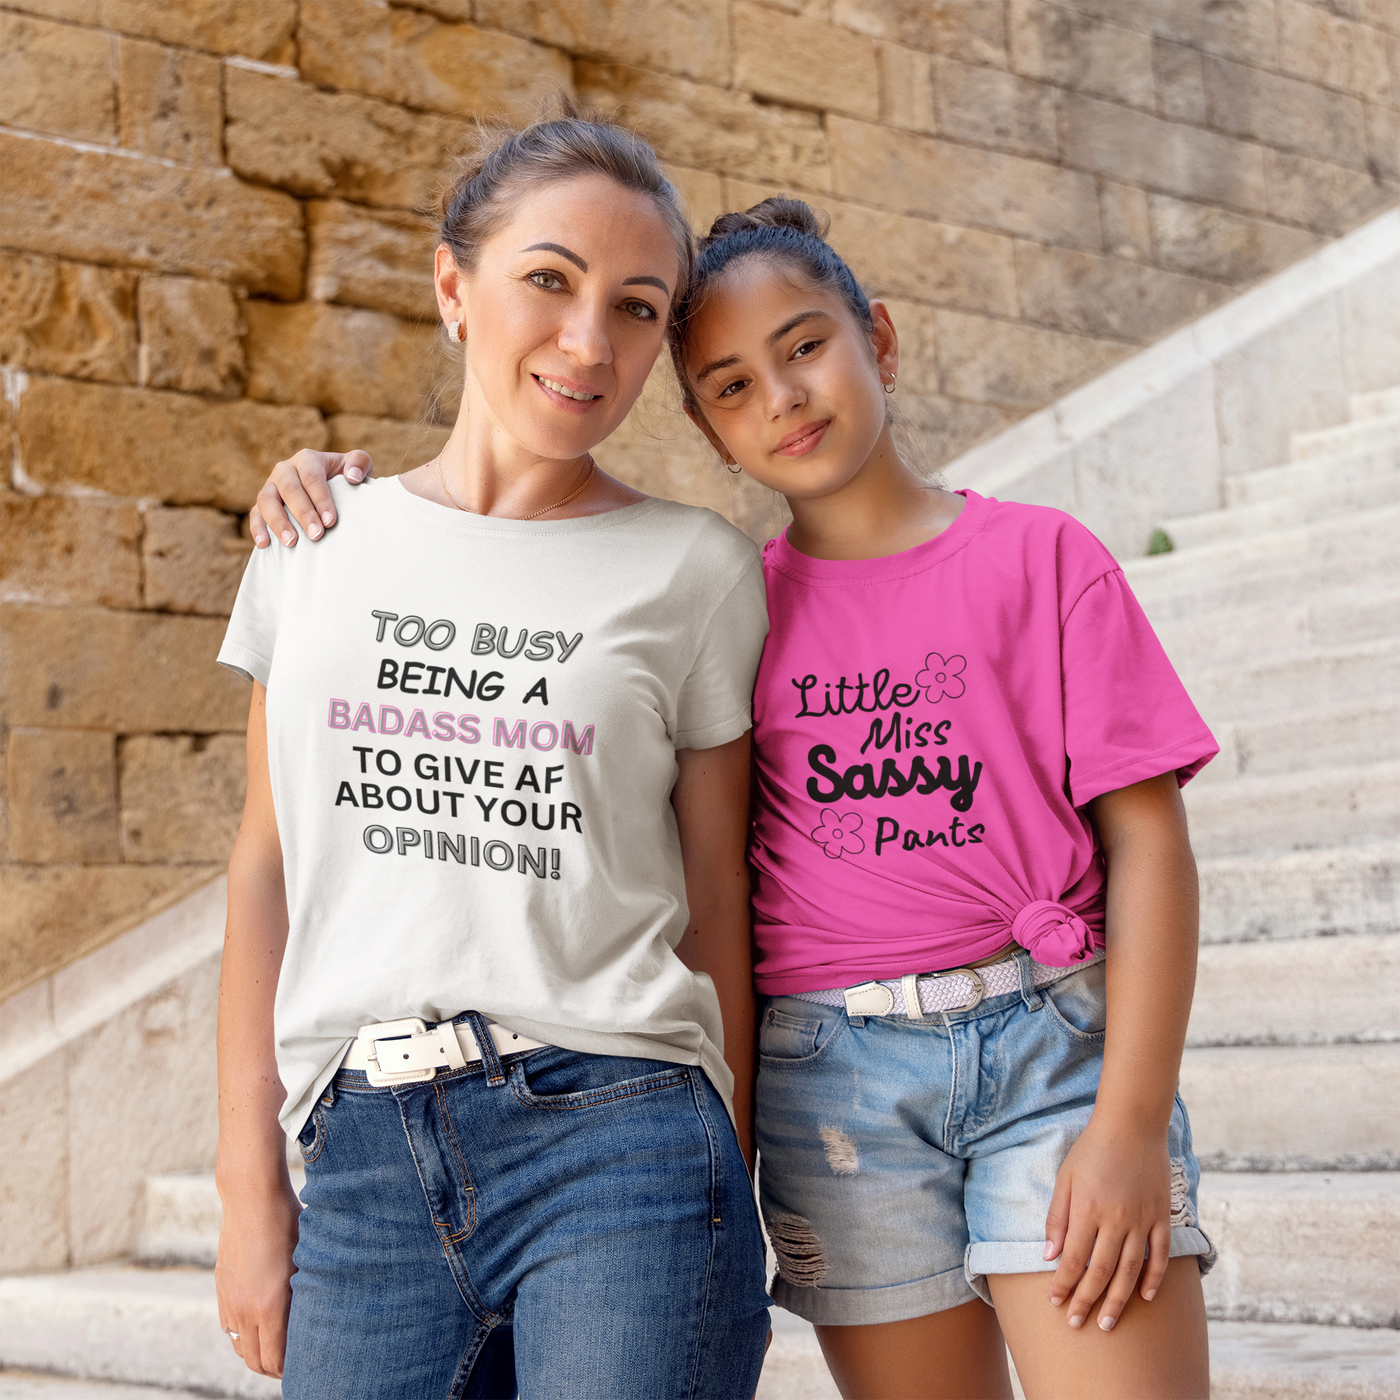 Too Busy being a BadAss Mom! Tee